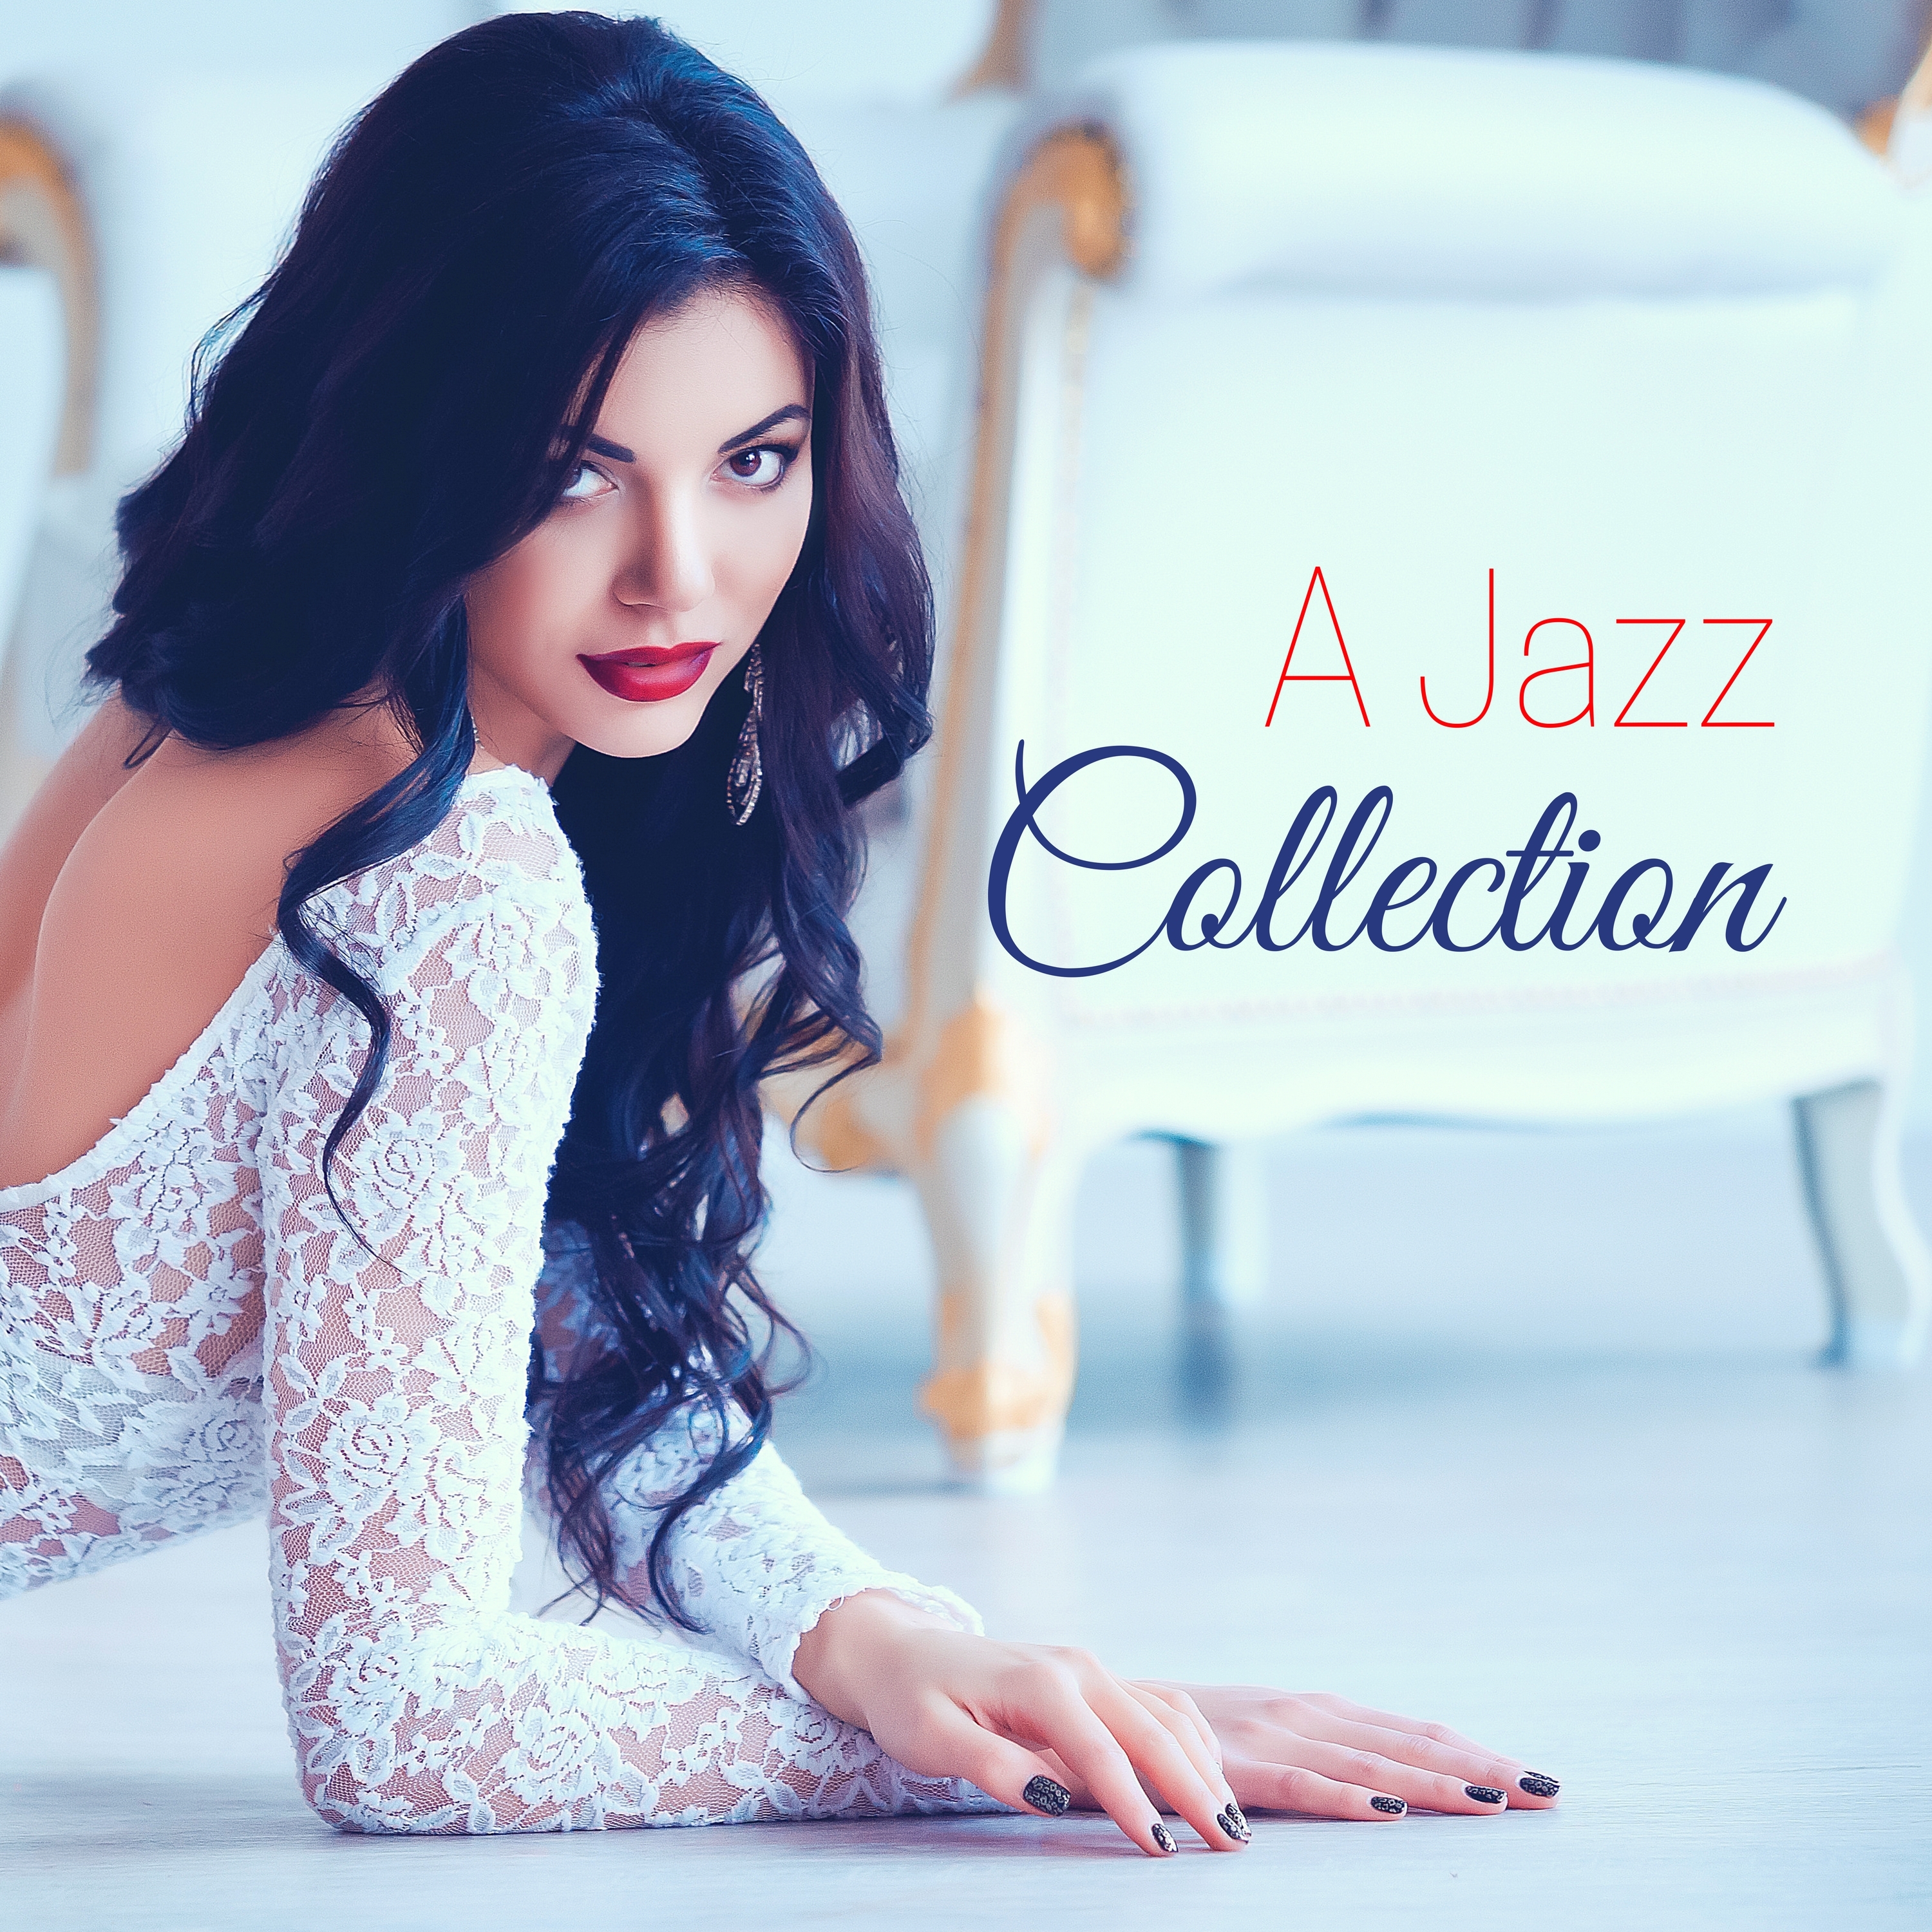 A Jazz Collection - Instrumental Sensual Music for Massage & Intimate Moments